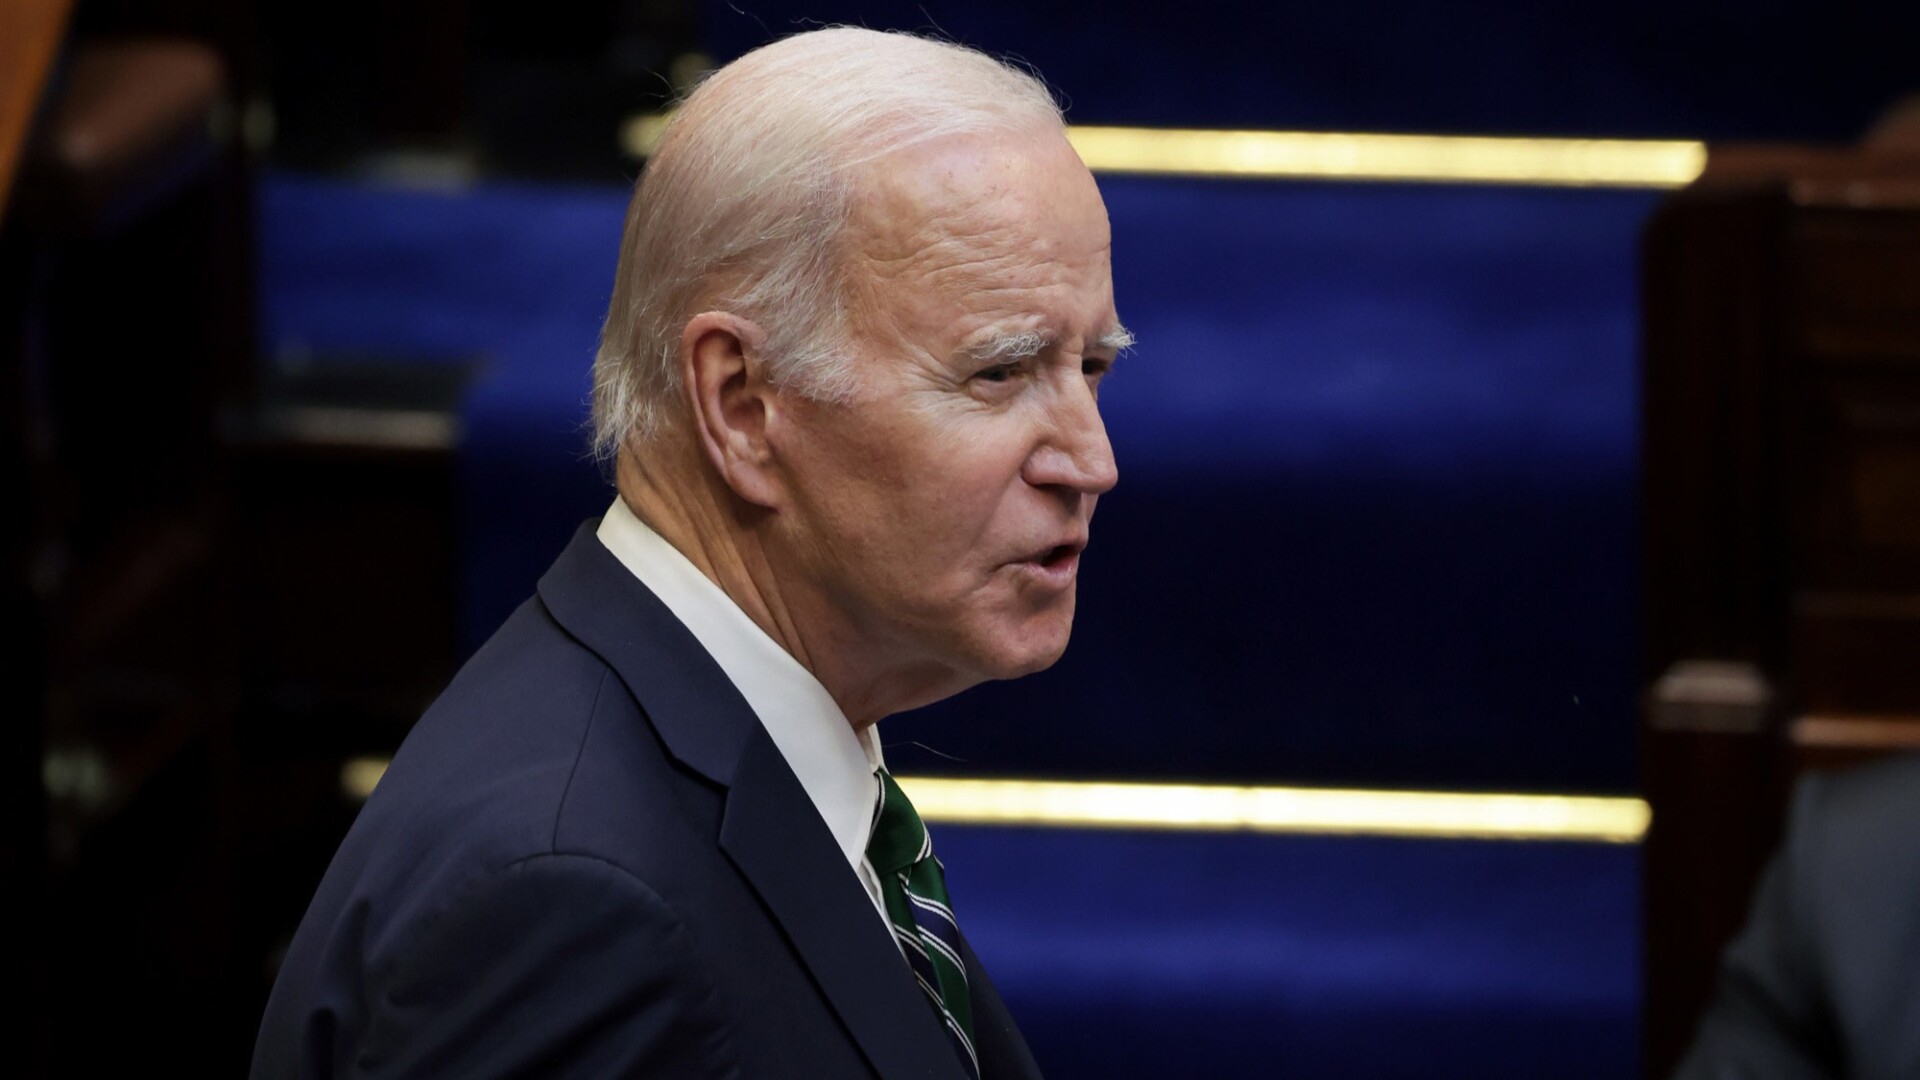 // Joseph Biden / Archivbild (cropped) / by Houses of the Oireachtas from Ireland is licensed under CC BY 2.0. https://creativecommons.org/licenses/by/2.0/